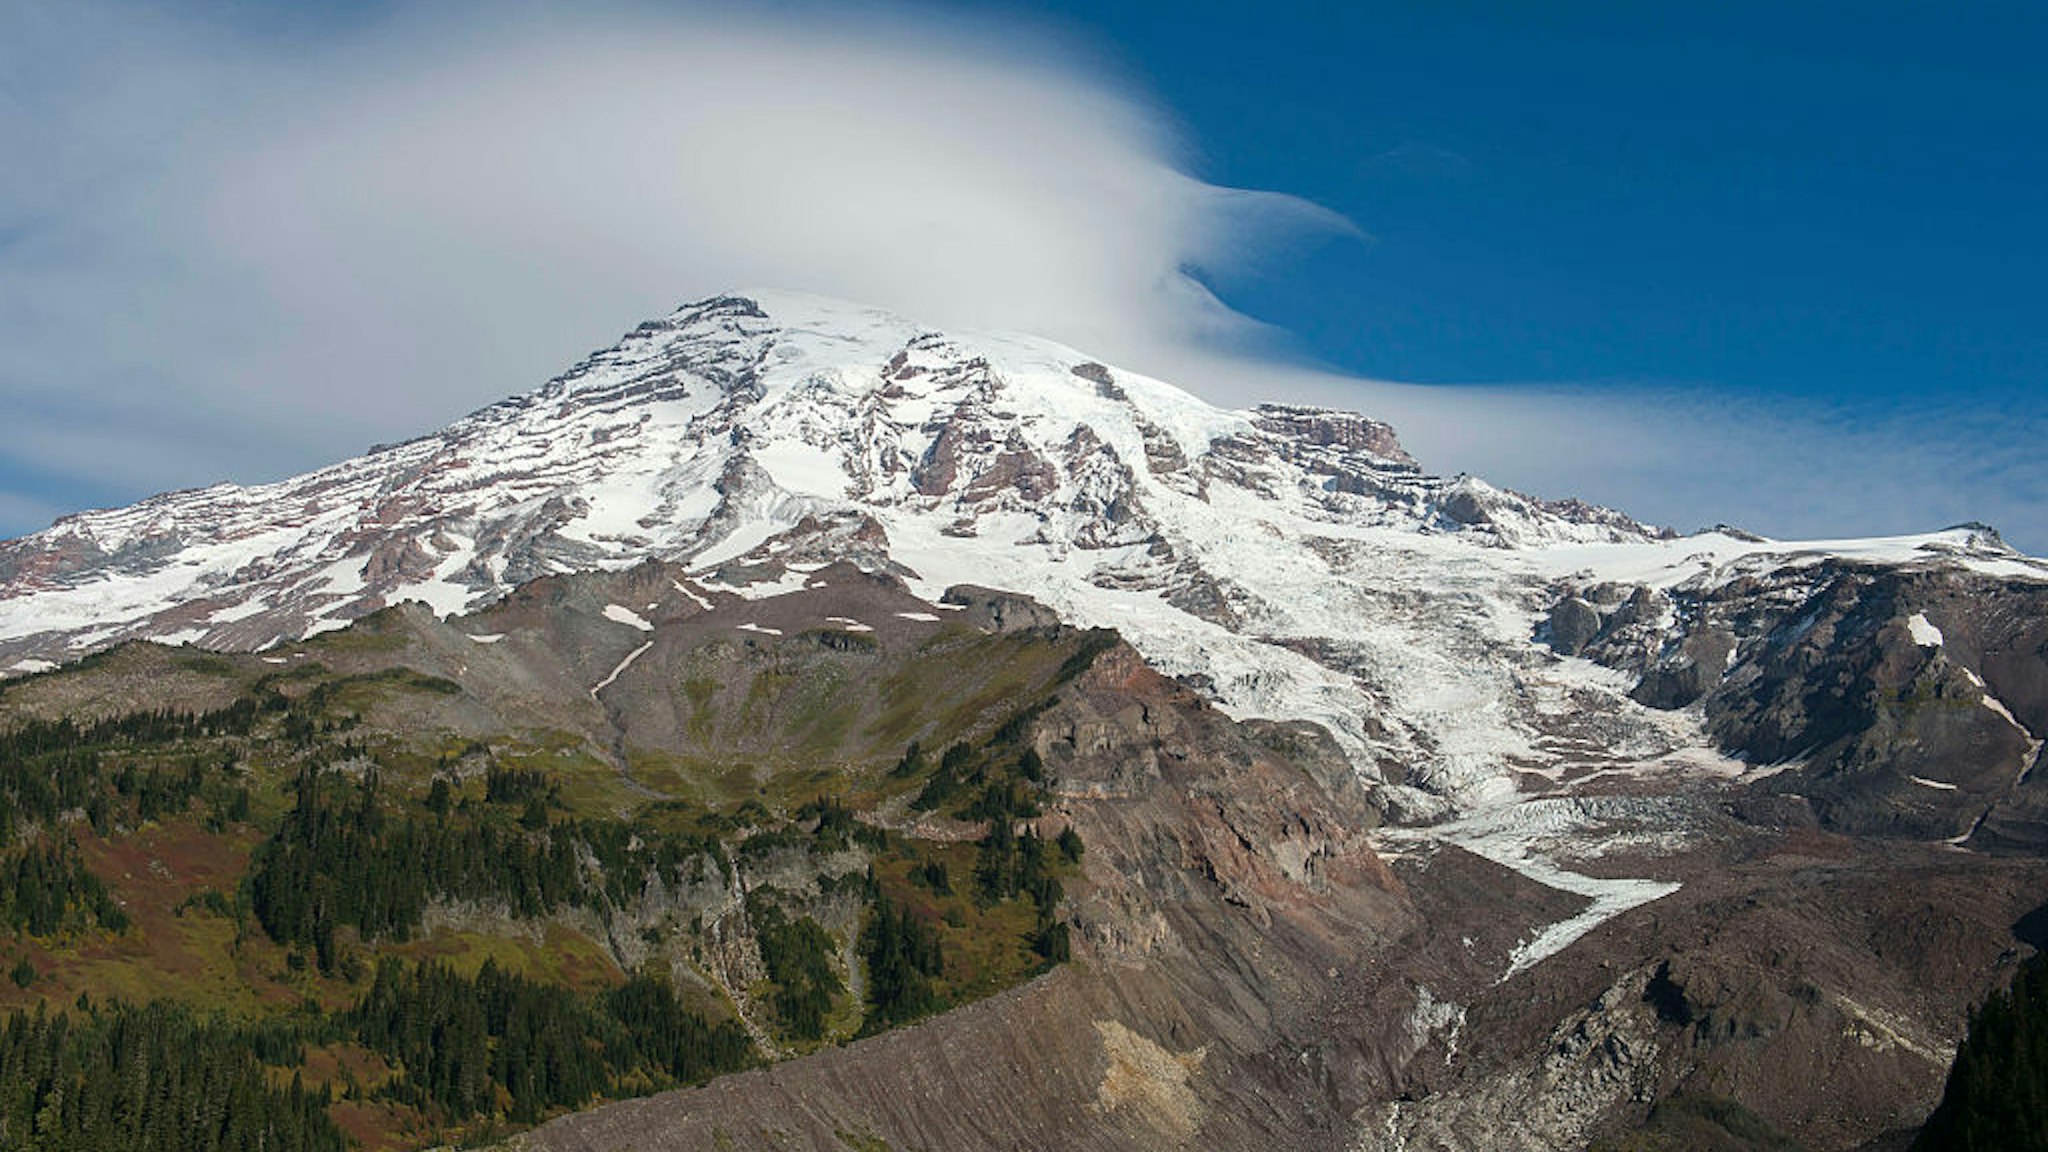 WASHINGTON, UNITED STATES - 2016/09/24: View from the Nisqually Vista Trail of Mount Rainier with the Nisqually Glacier in Mt. Rainier National Park in Washington State, USA